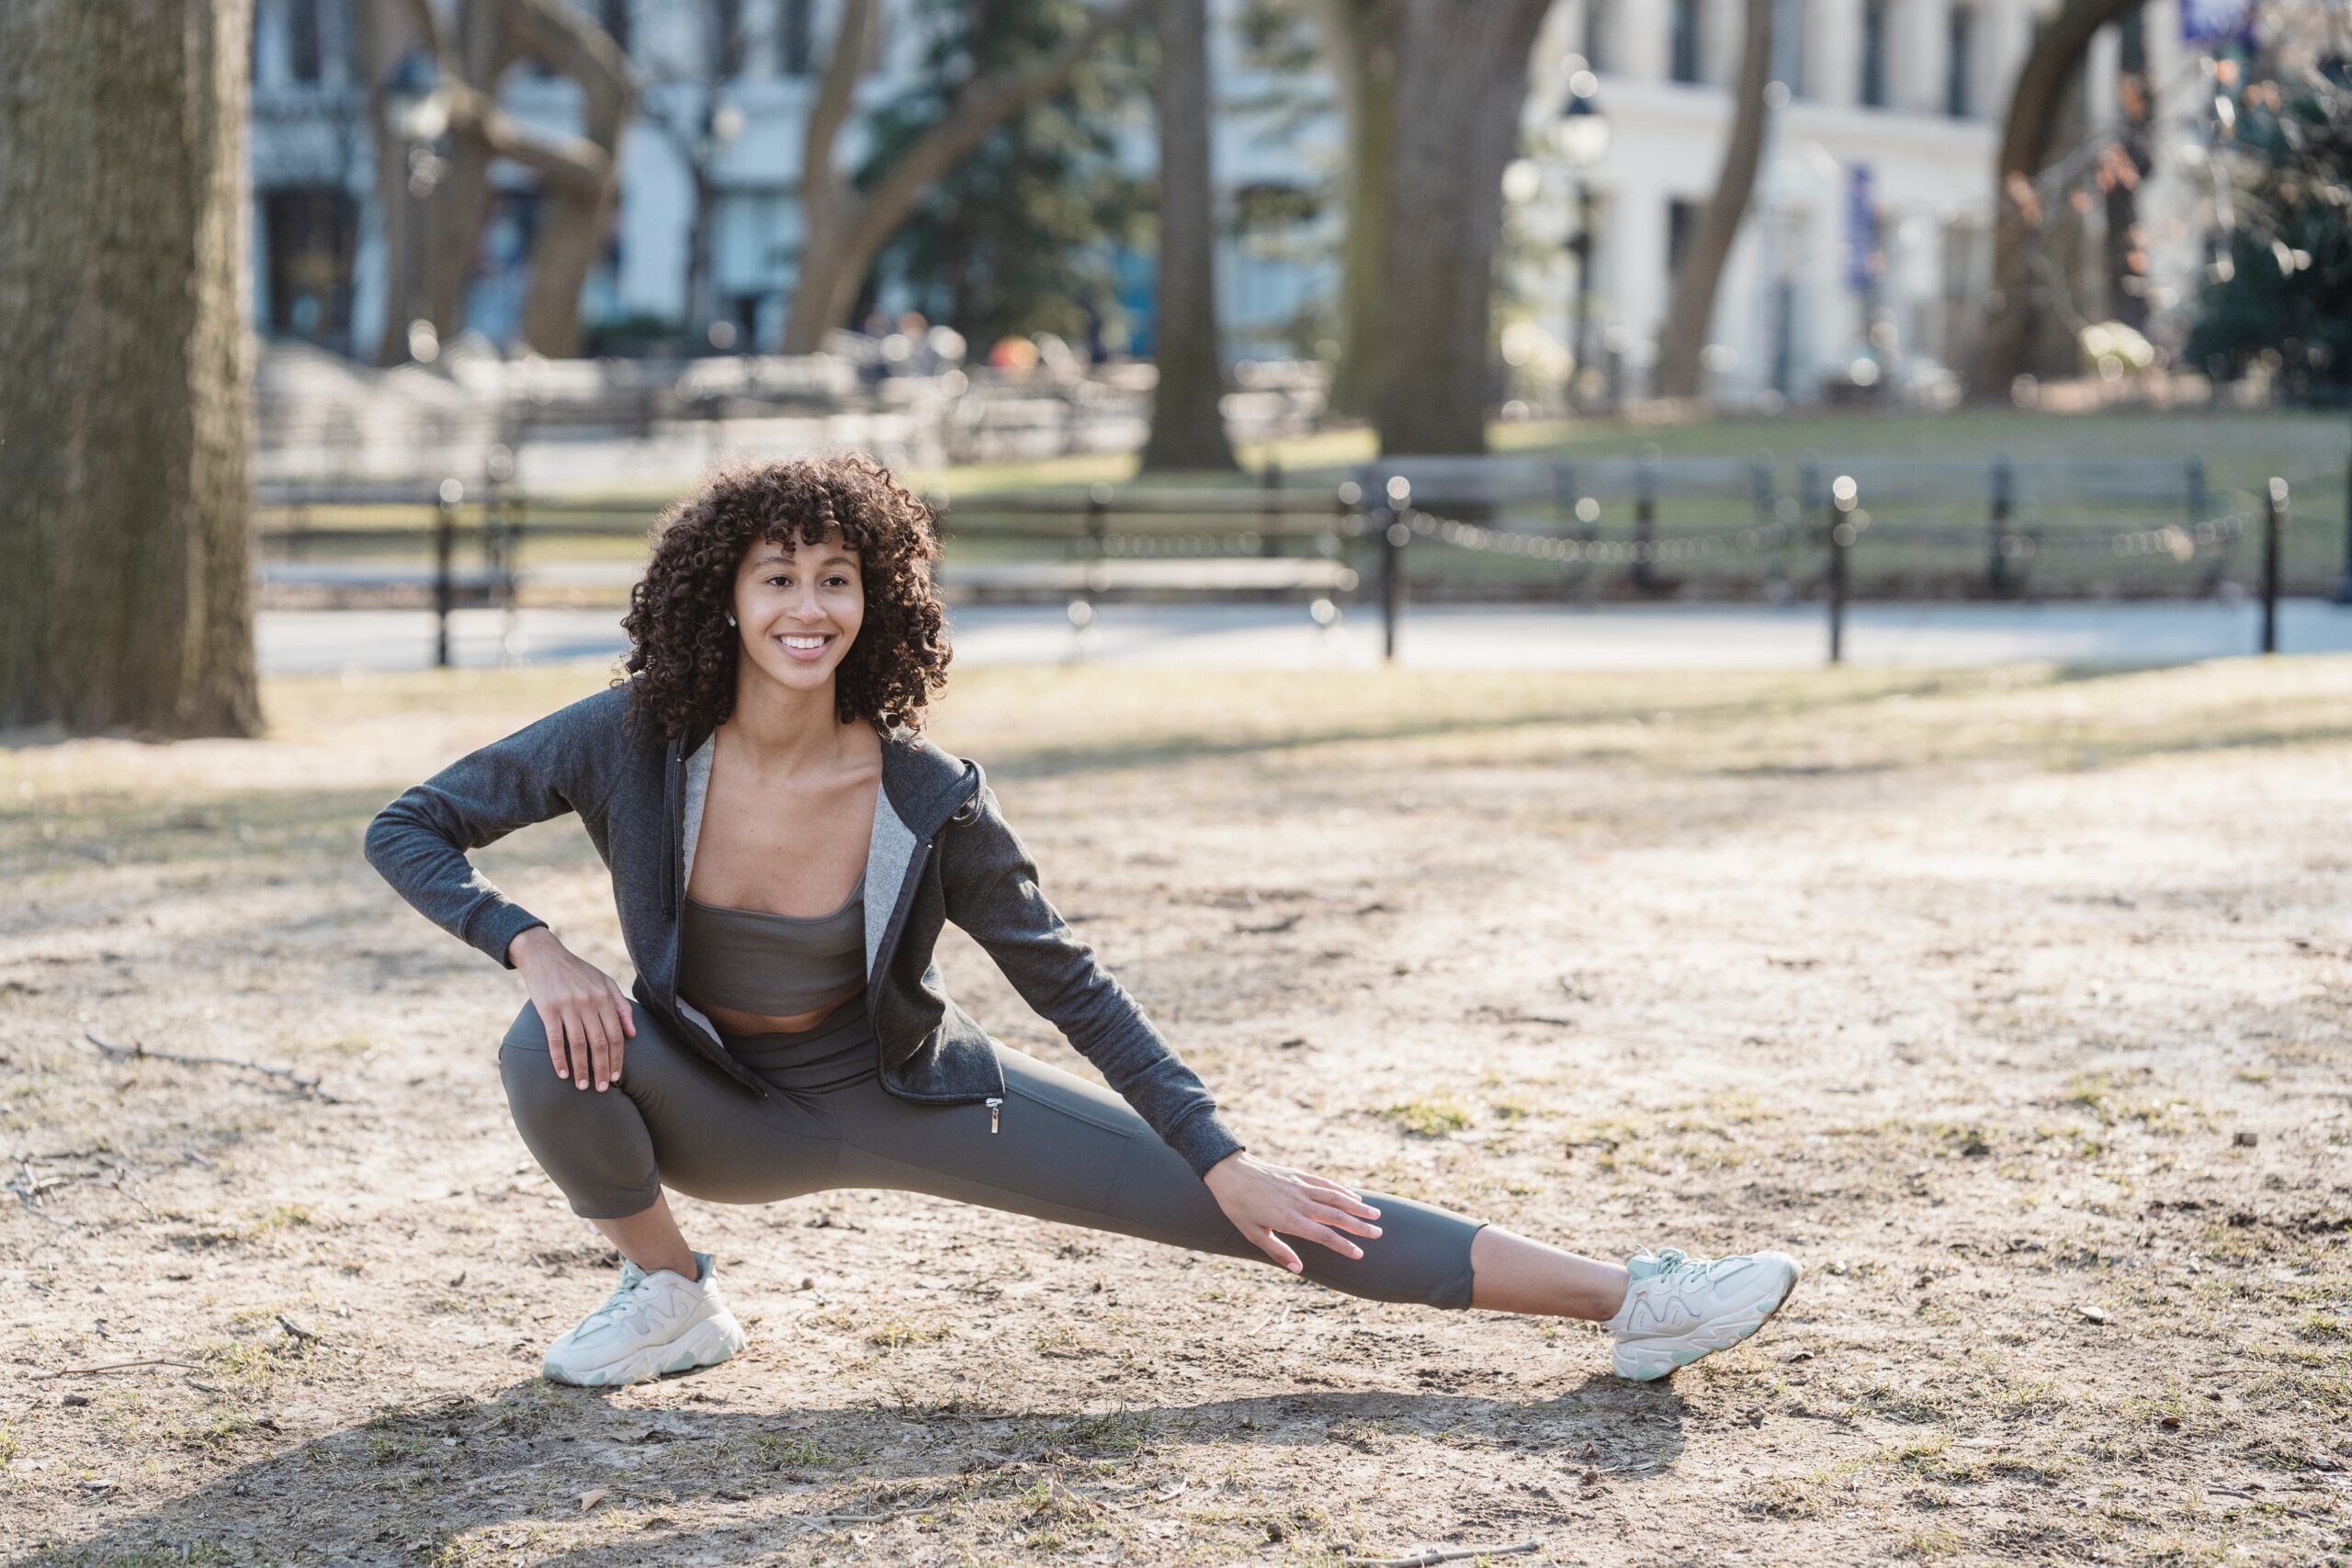 The Best Athleta Leggings, Ranked for Lounging, Running, Yoga and All the  Things